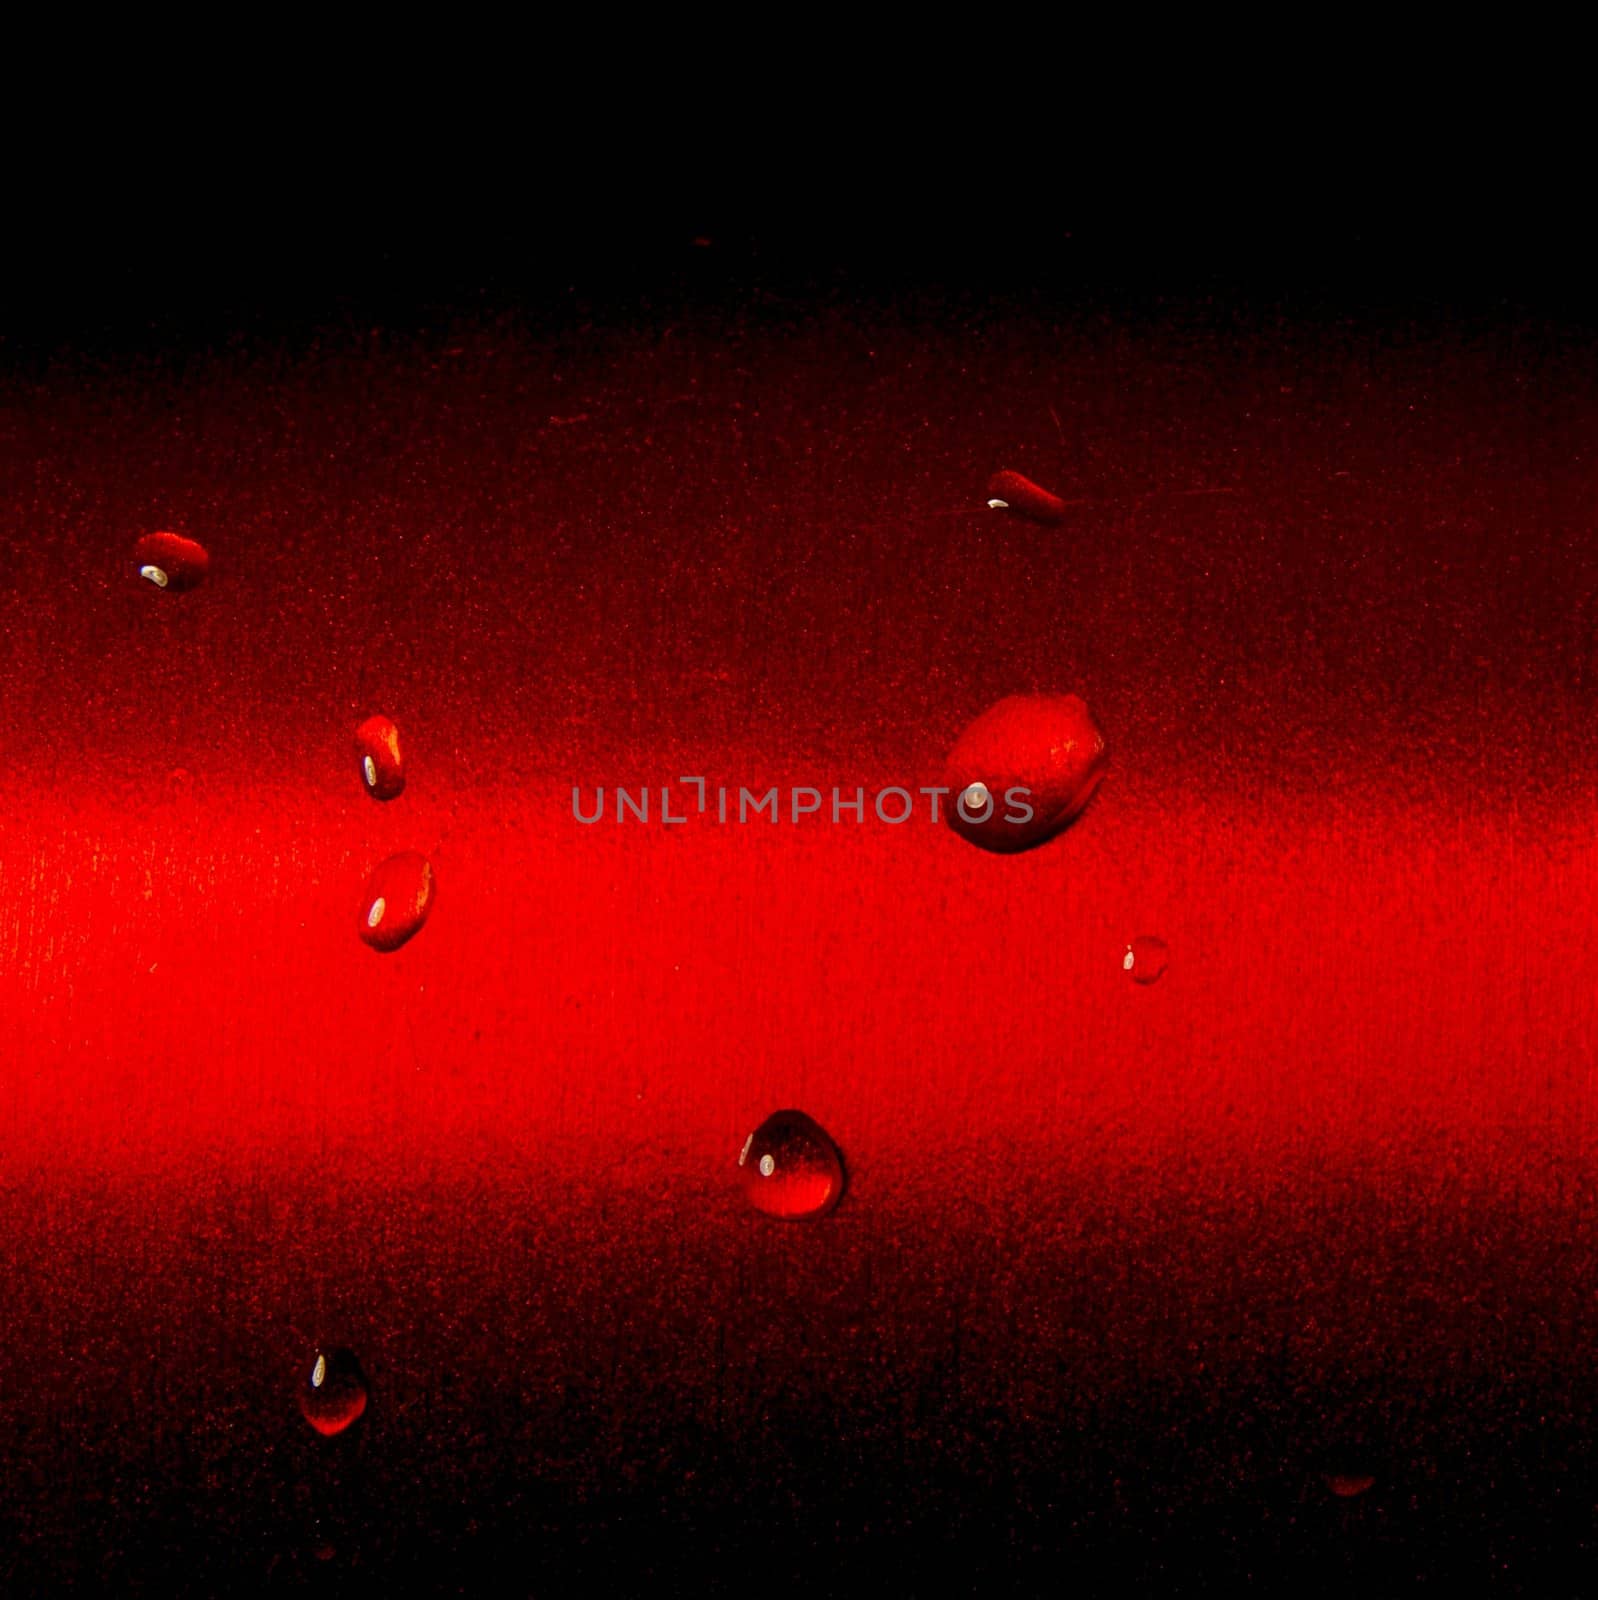 Some raindrops on red metallic surface